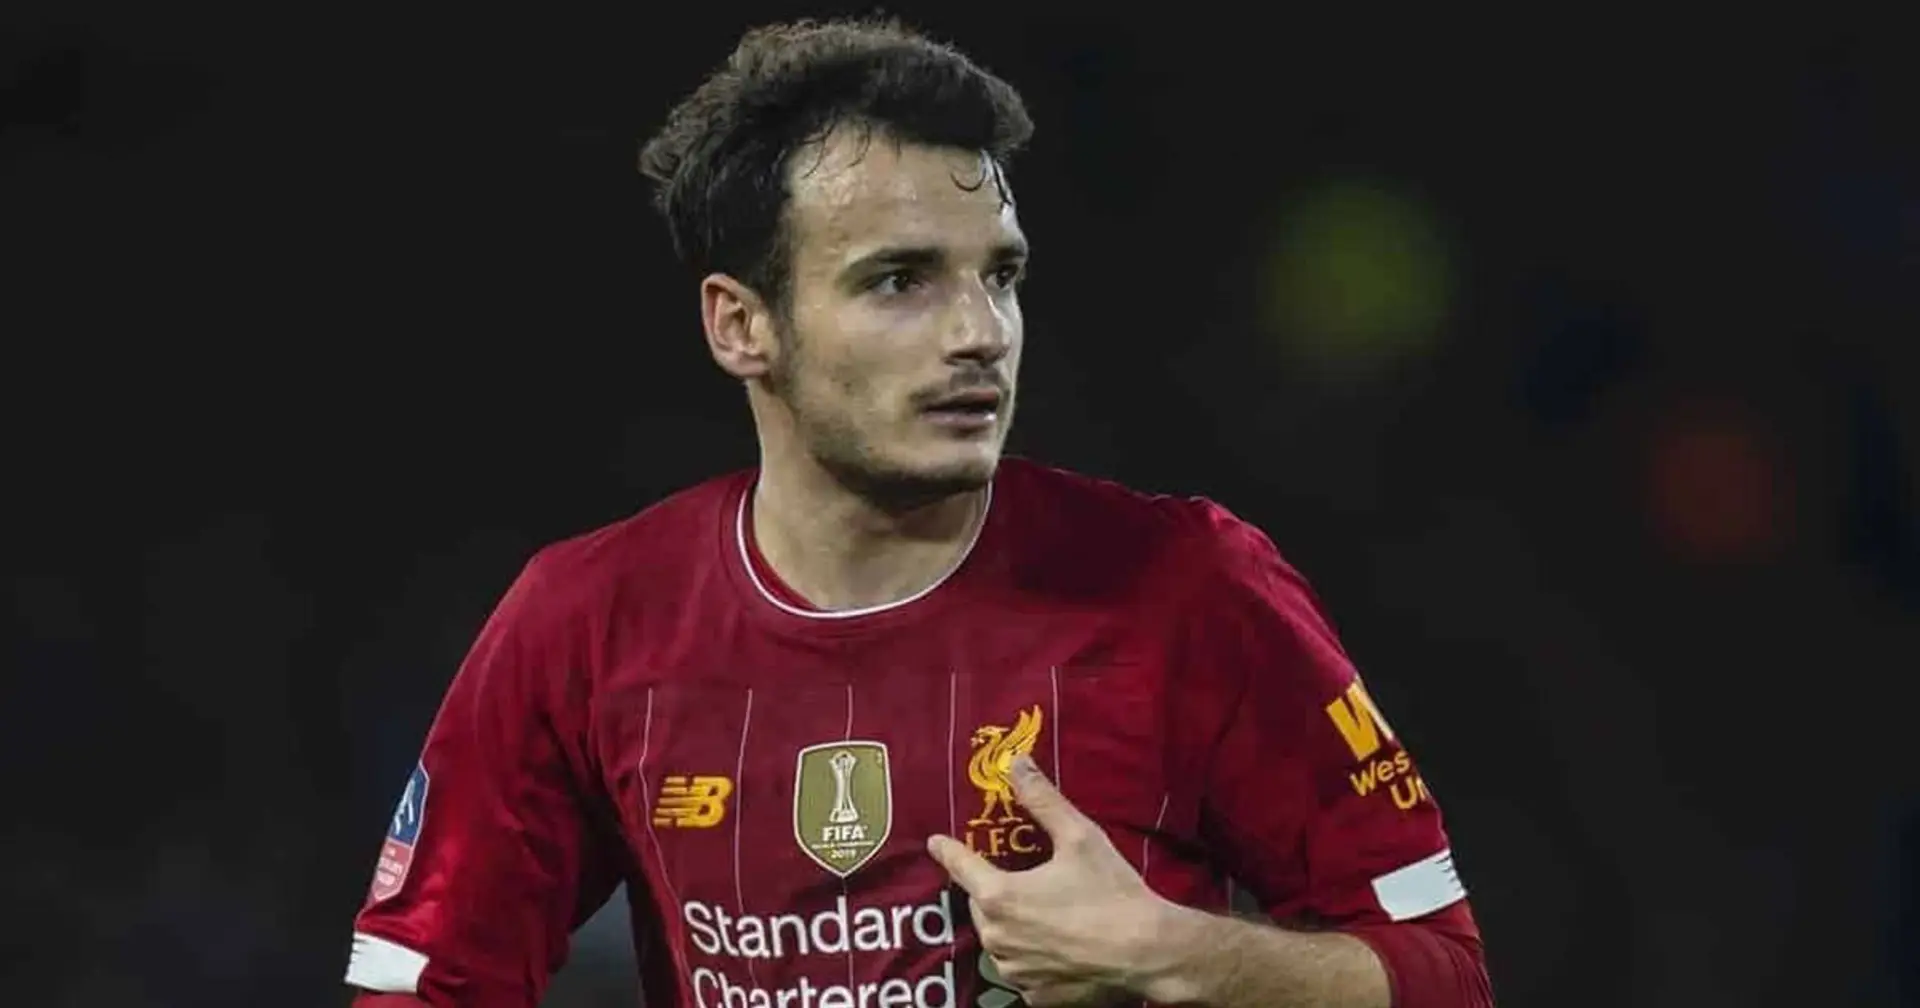 Liverpool reportedly try to keep Pedro Chirivella, offer 5-year deal to Spaniard